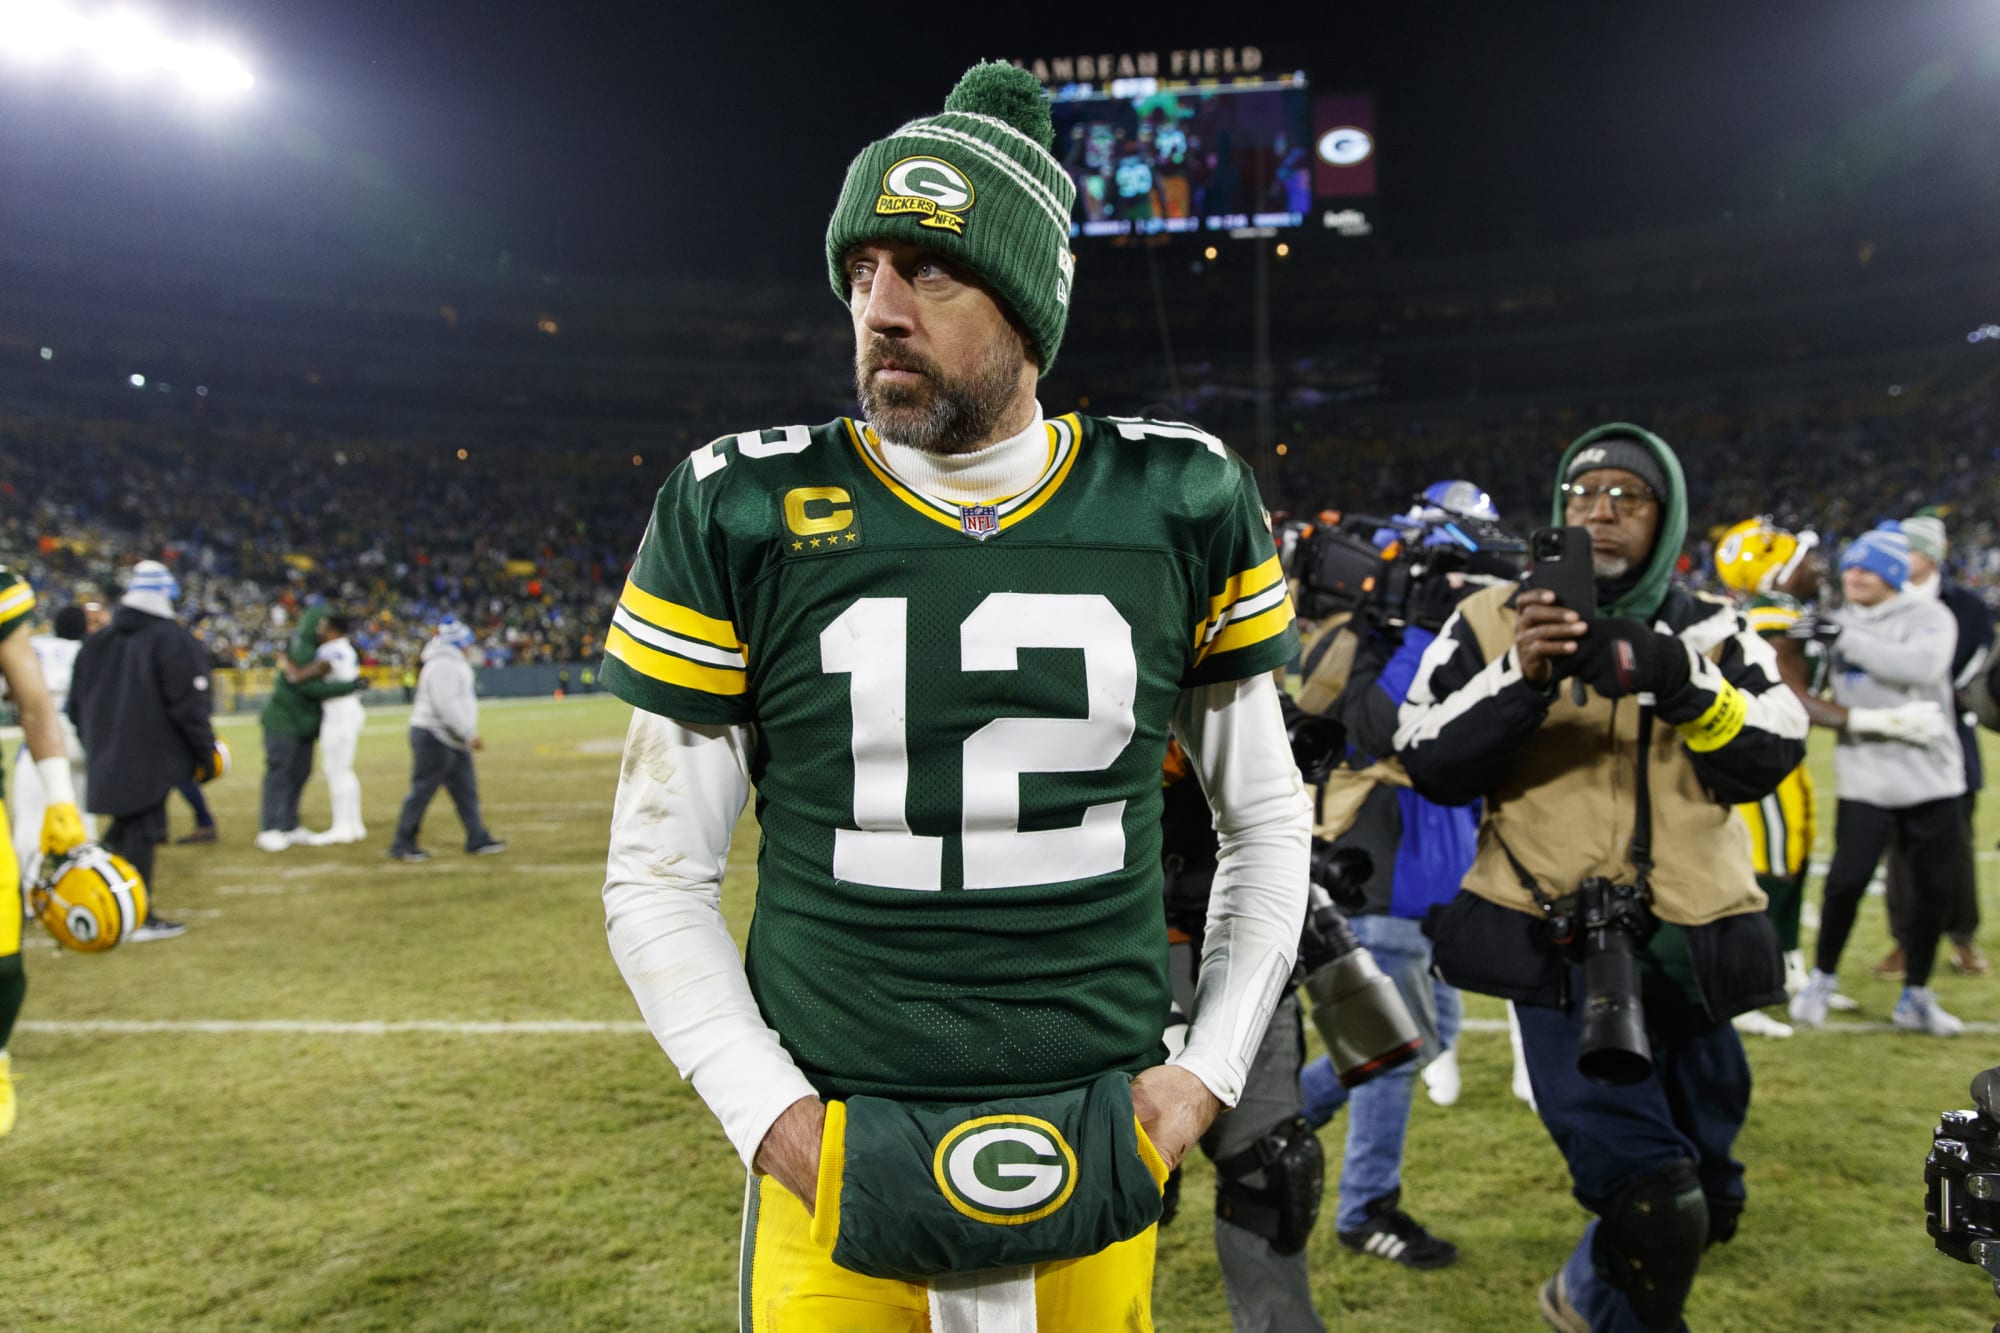 One ring and trying to rule them all: Details of Aaron Rodgers dark journey revealed